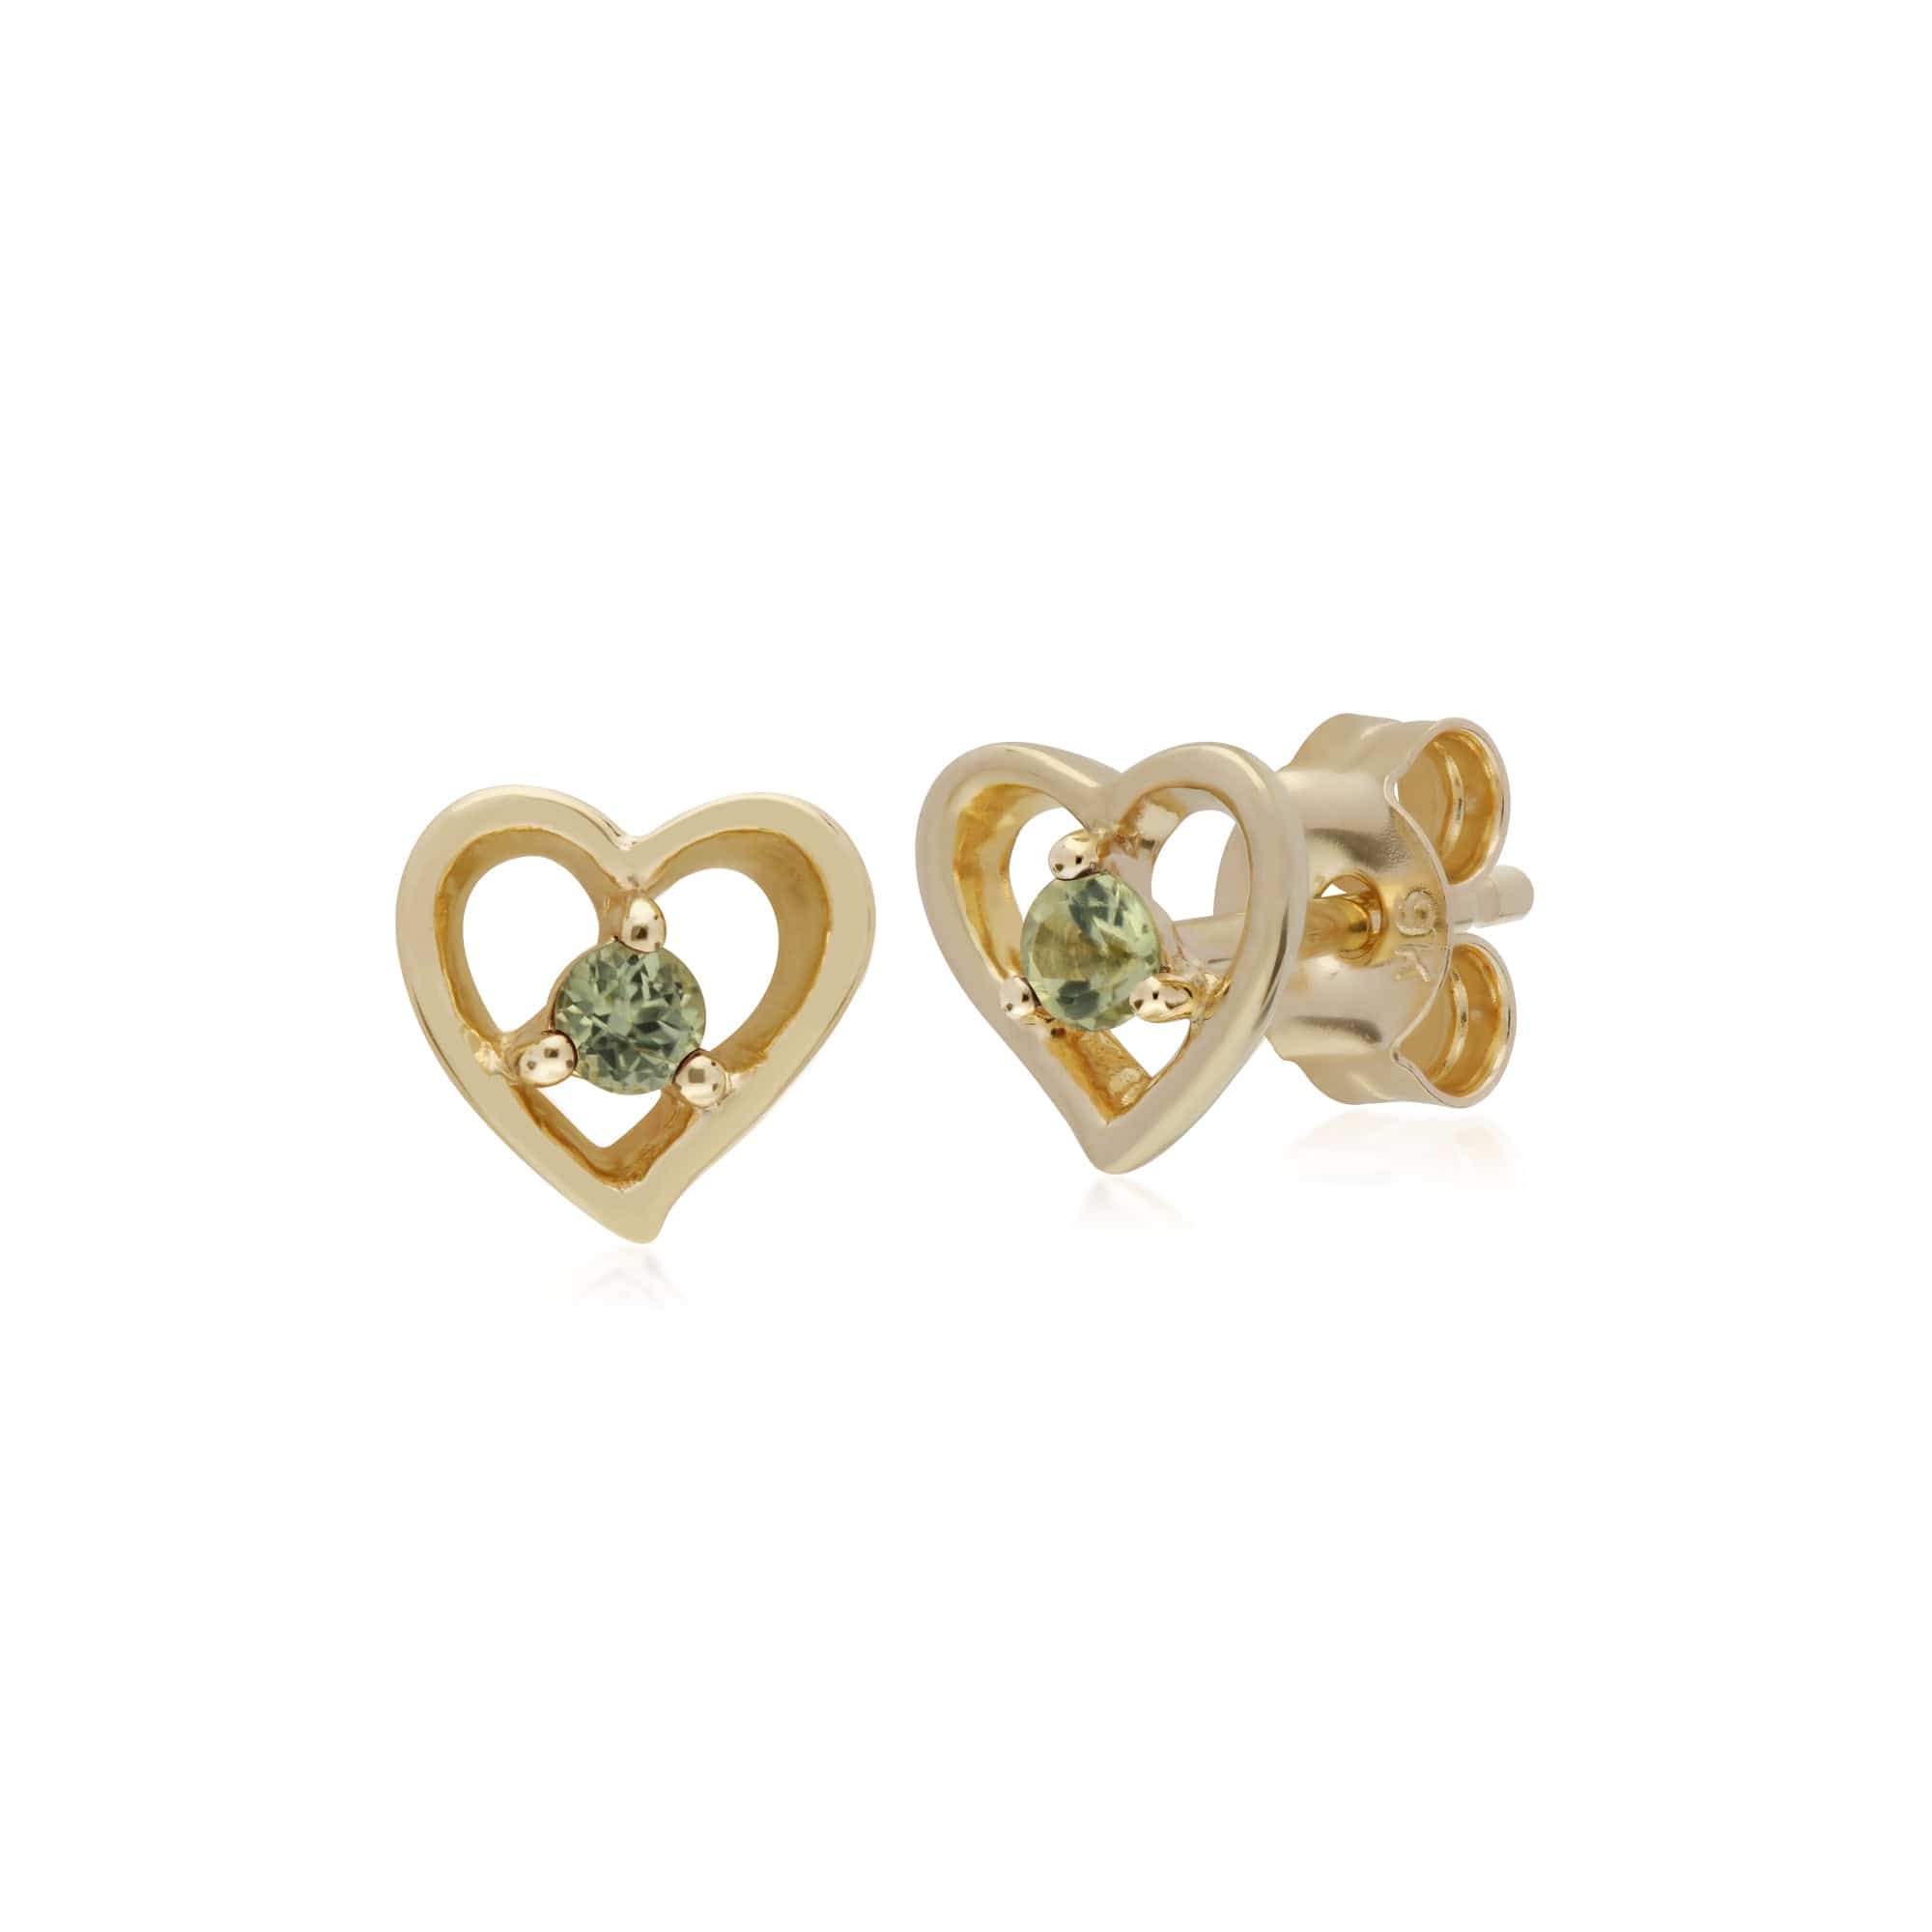 135E1521069-135P1875059 Classic Round Peridot Single Stone Heart Stud Earrings & Necklace Set in 9ct Yellow Gold 2